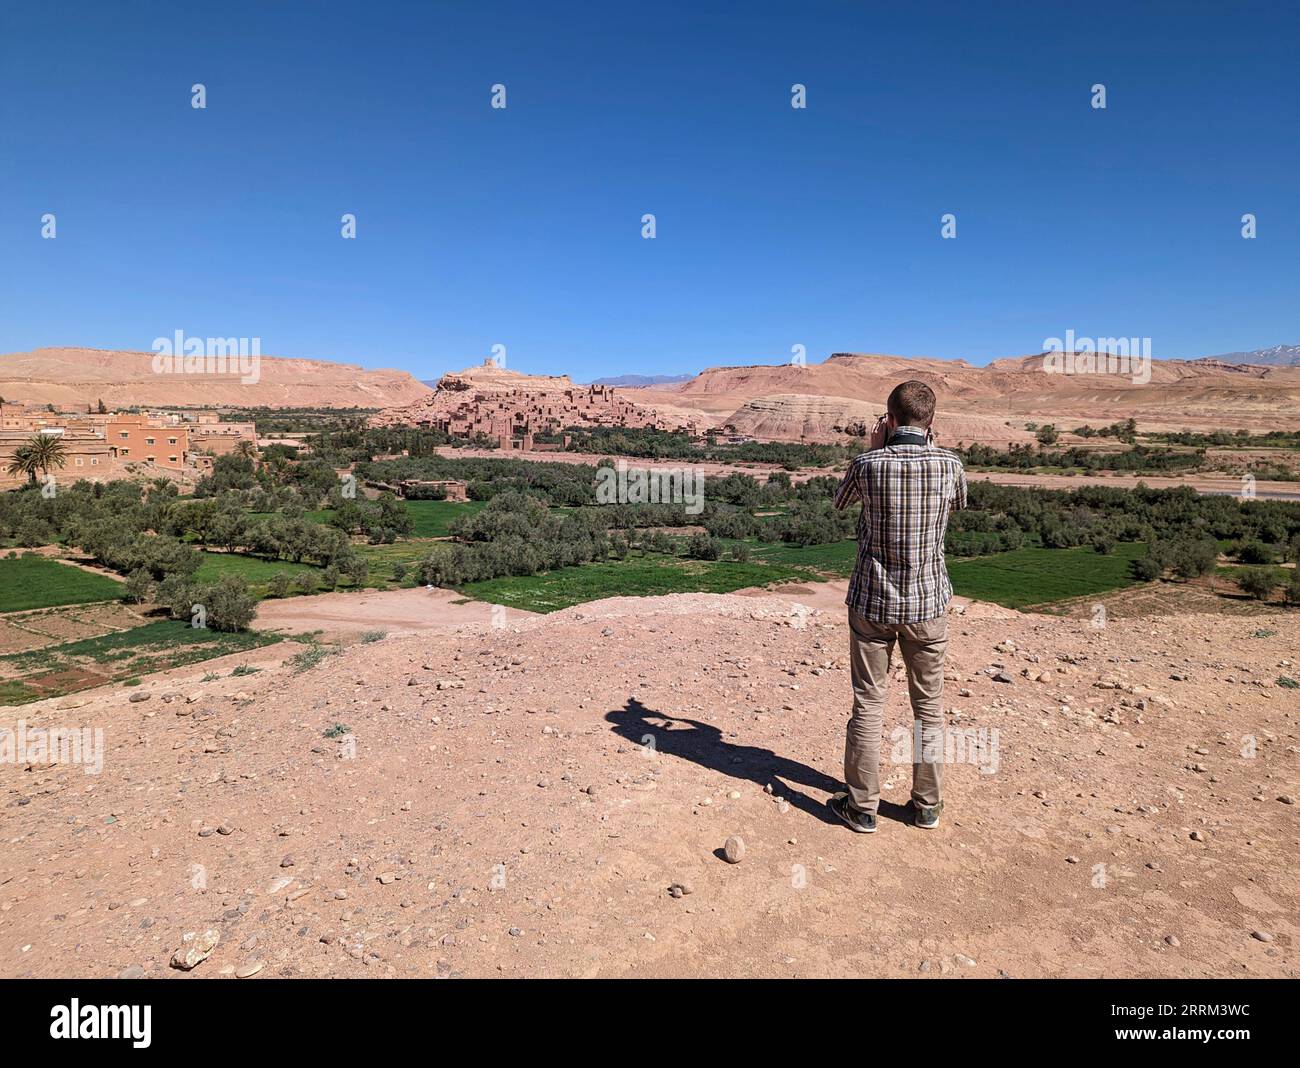 A tourist taking a photo from a famous viewpoint of the historic town Ait Ben Haddou in Morocco, famous berber town with many kasbahs built of clay, UNESCO world heritage Stock Photo